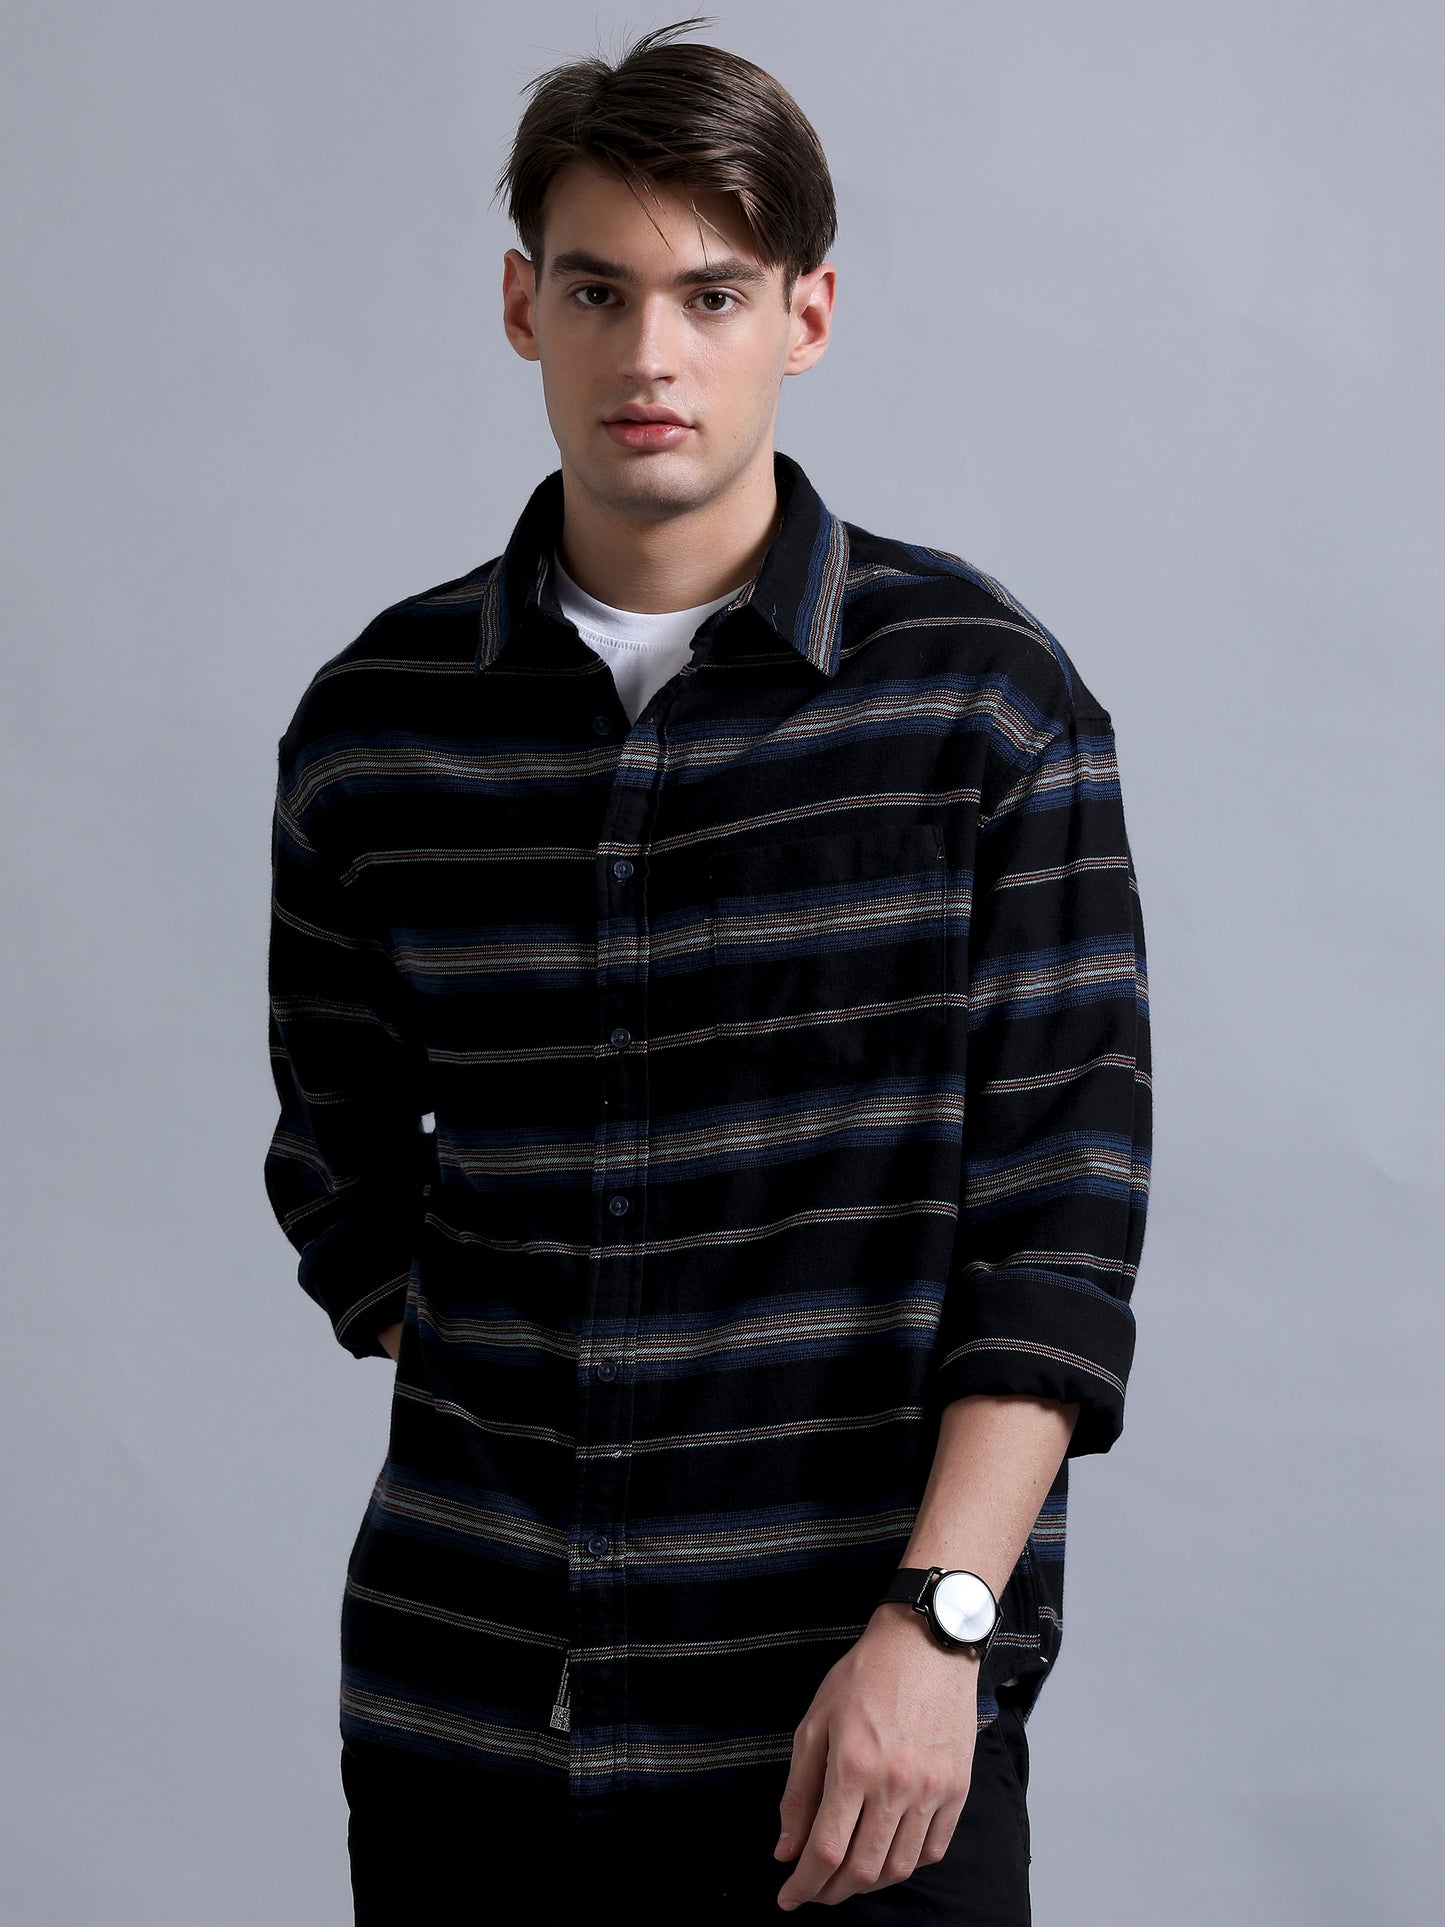 Premium Men Shirt, Relaxed Fit, Yarn Dyed Stripes, Pure Cotton, Full Sleeve, Black